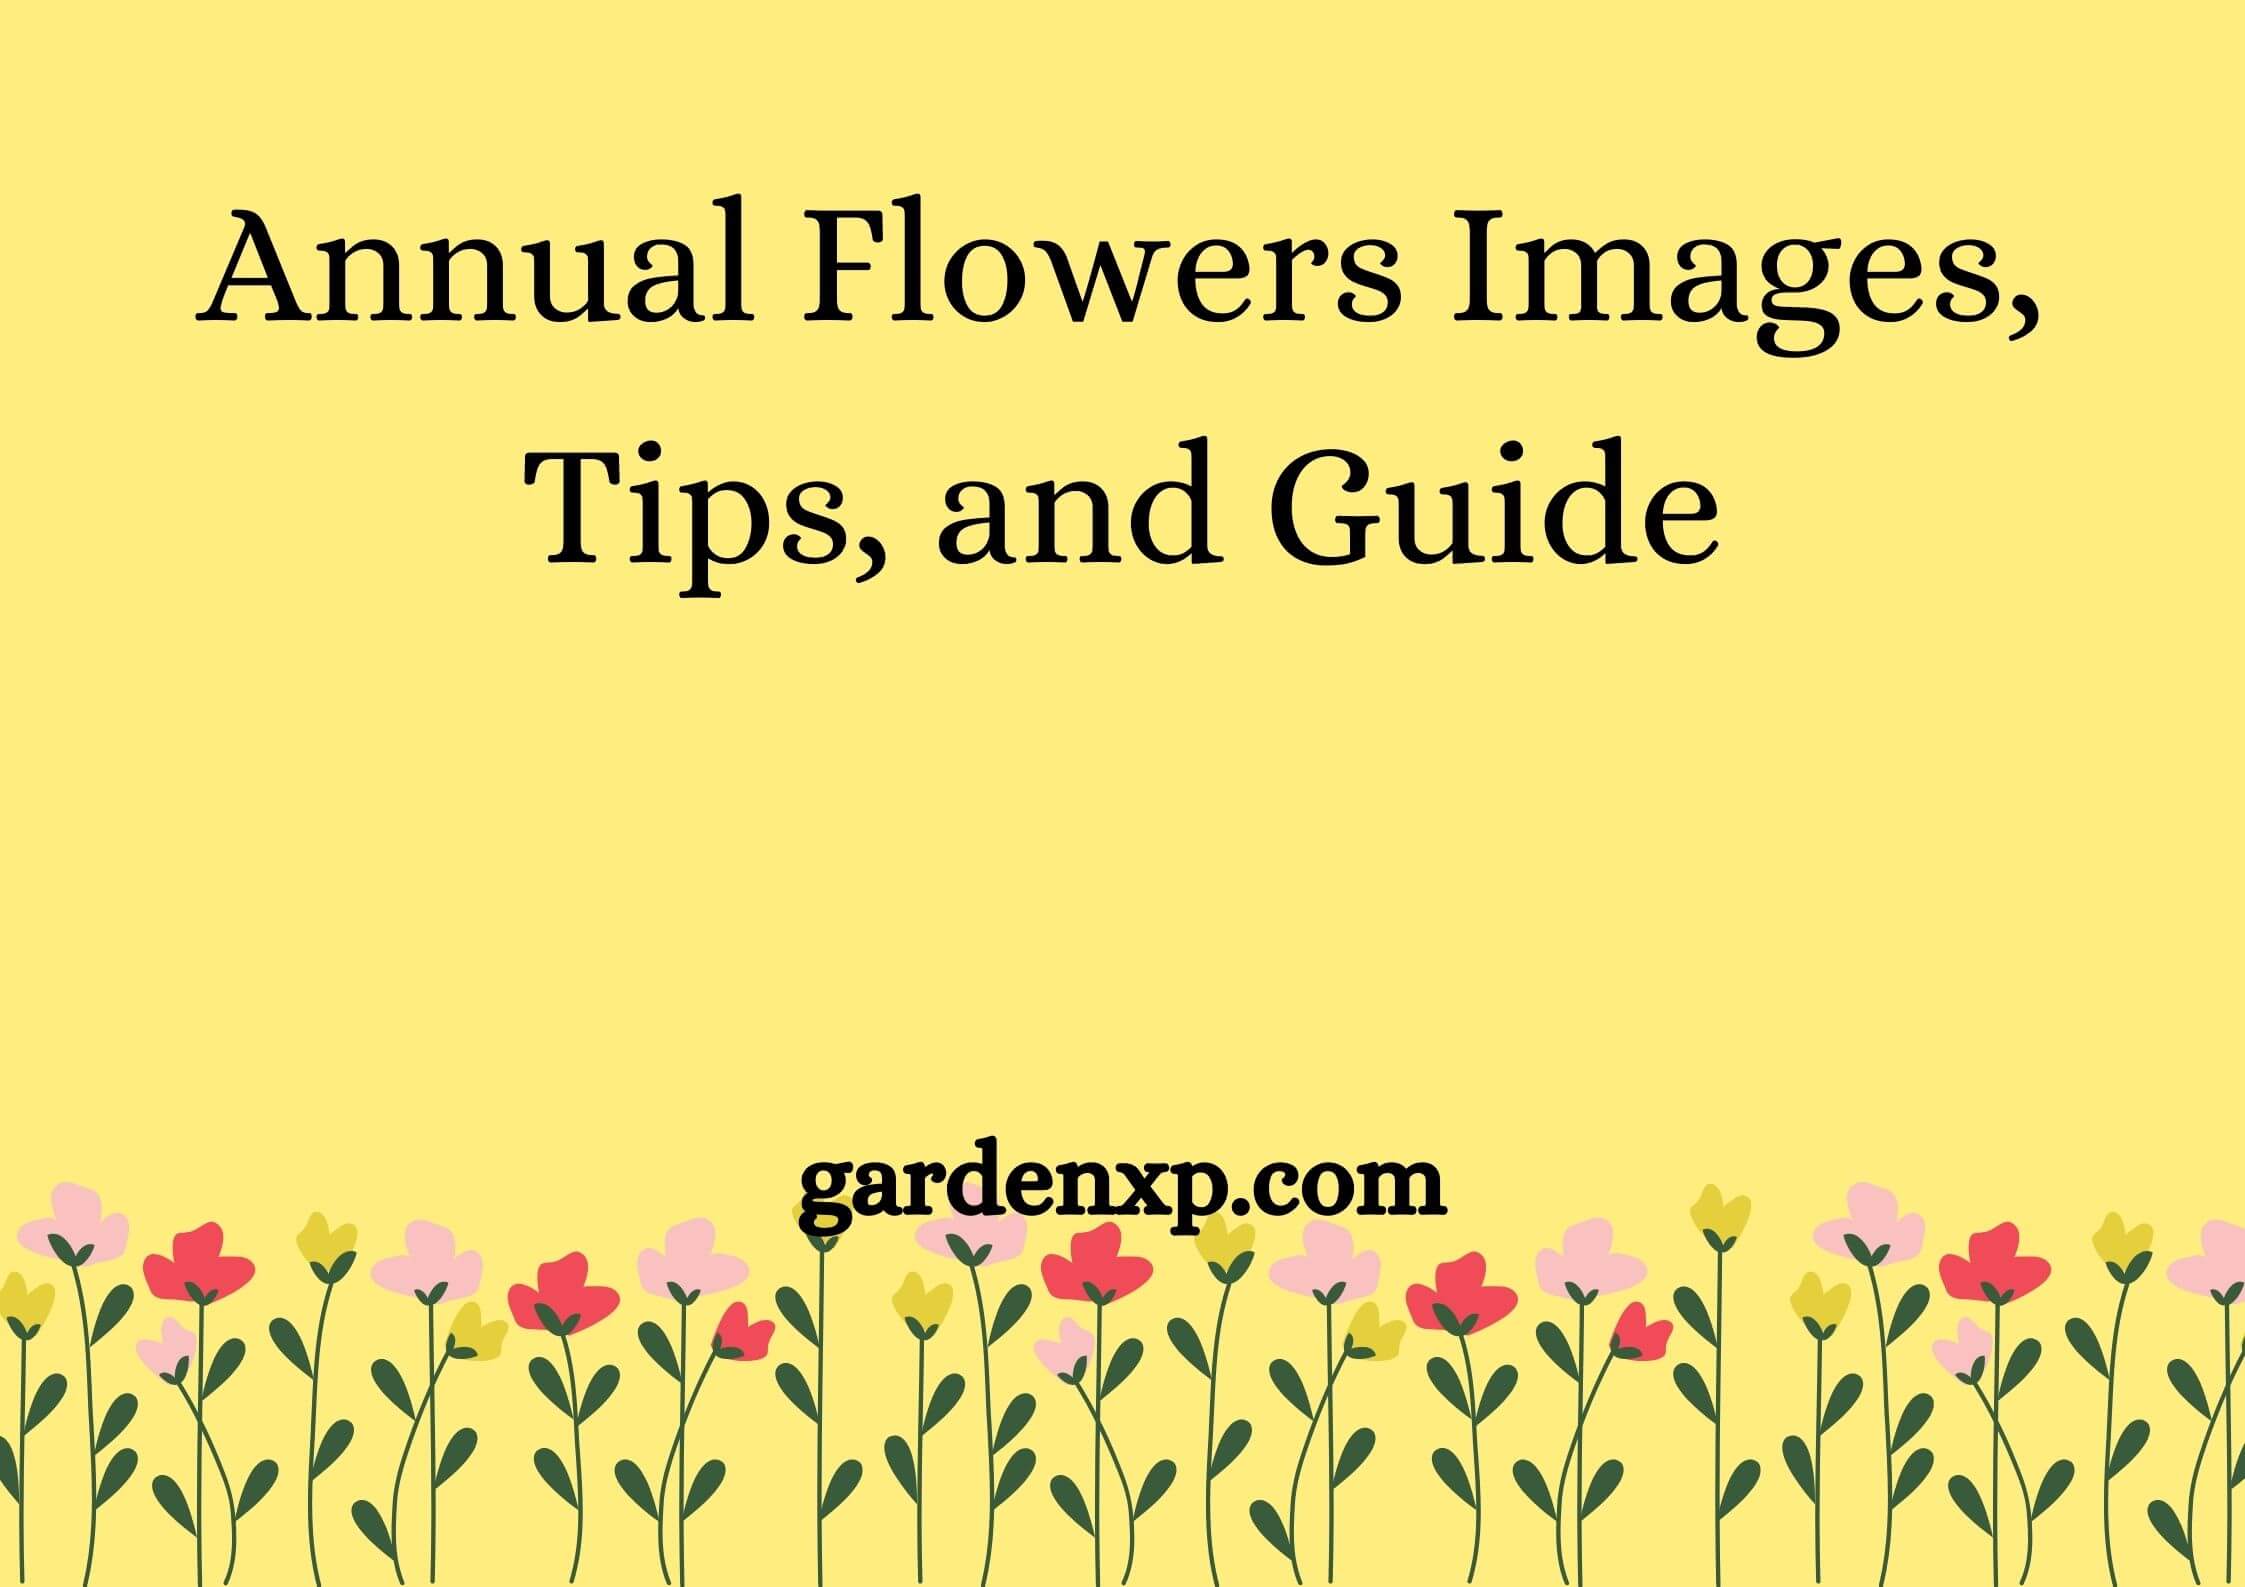 <strong>Annual Flowers Images, Tips, and Guide</strong>